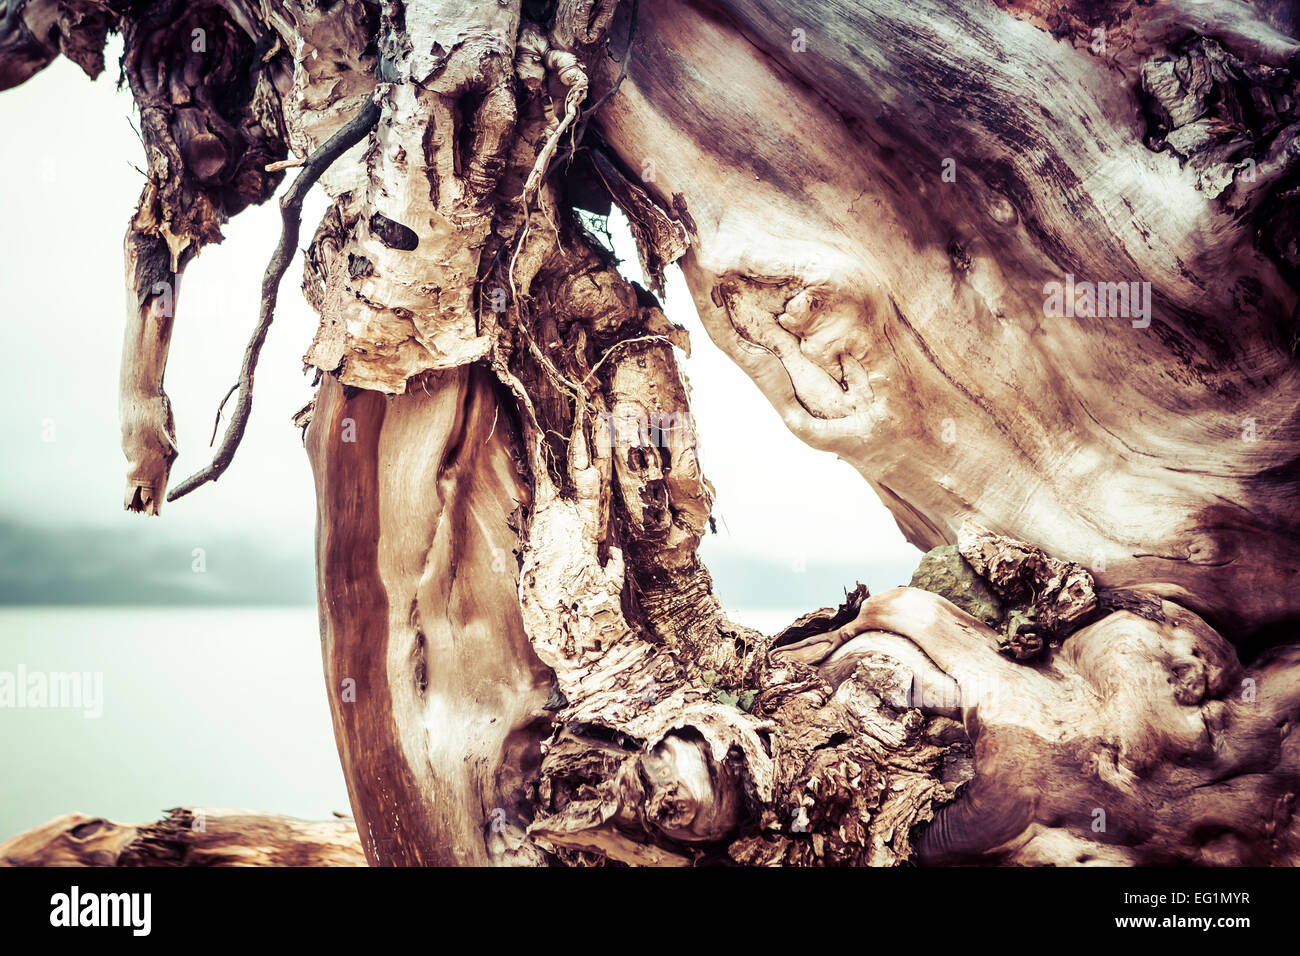 Wood patterns in a large root ball washed up on a beach. Stock Photo